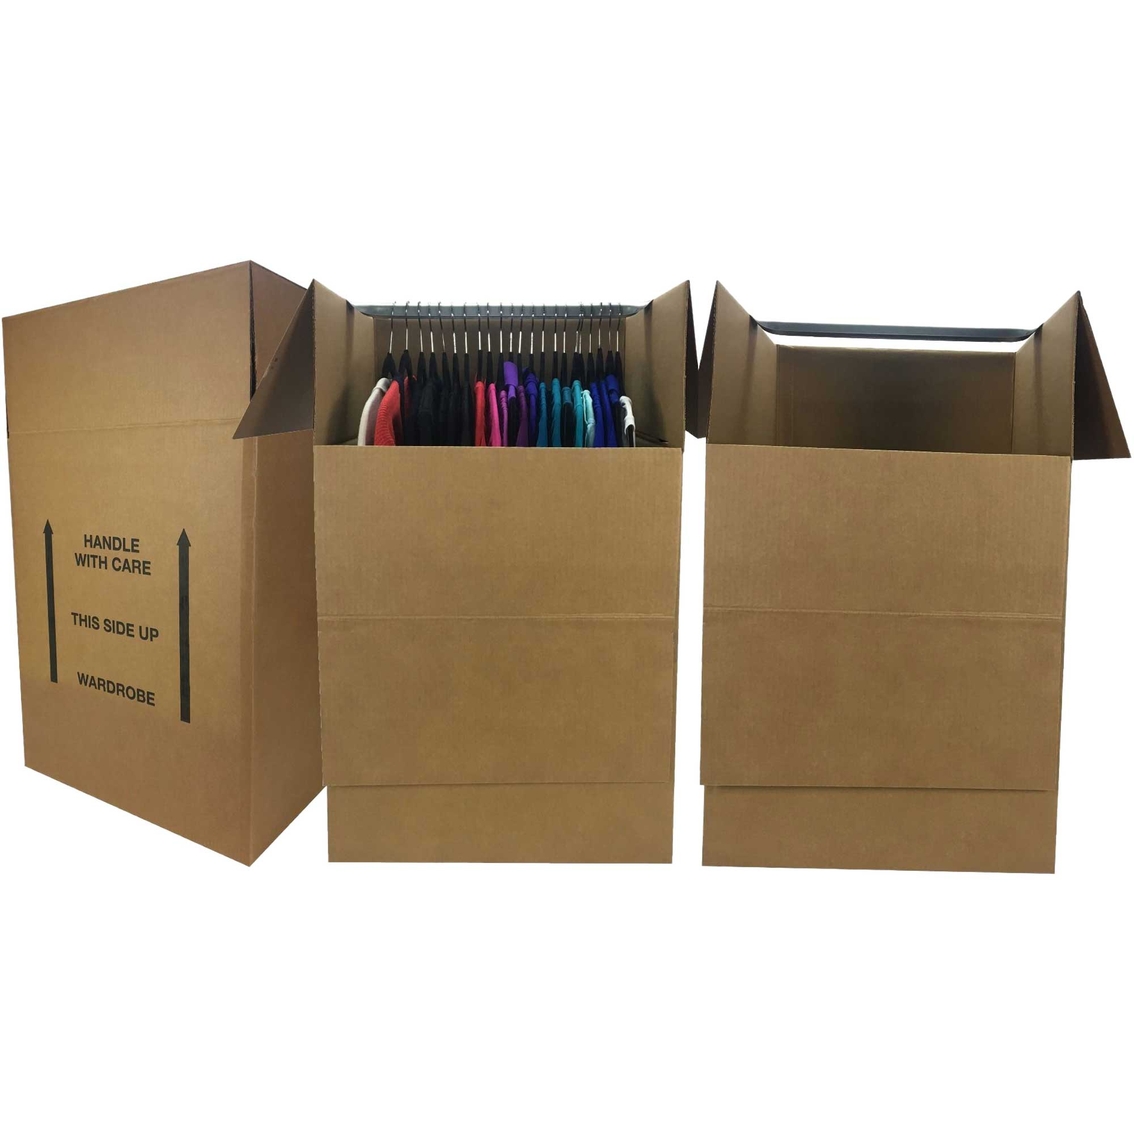 Uboxes Large Corrugated Wardrobe 24 In. X 24 In. X 40 In. Moving